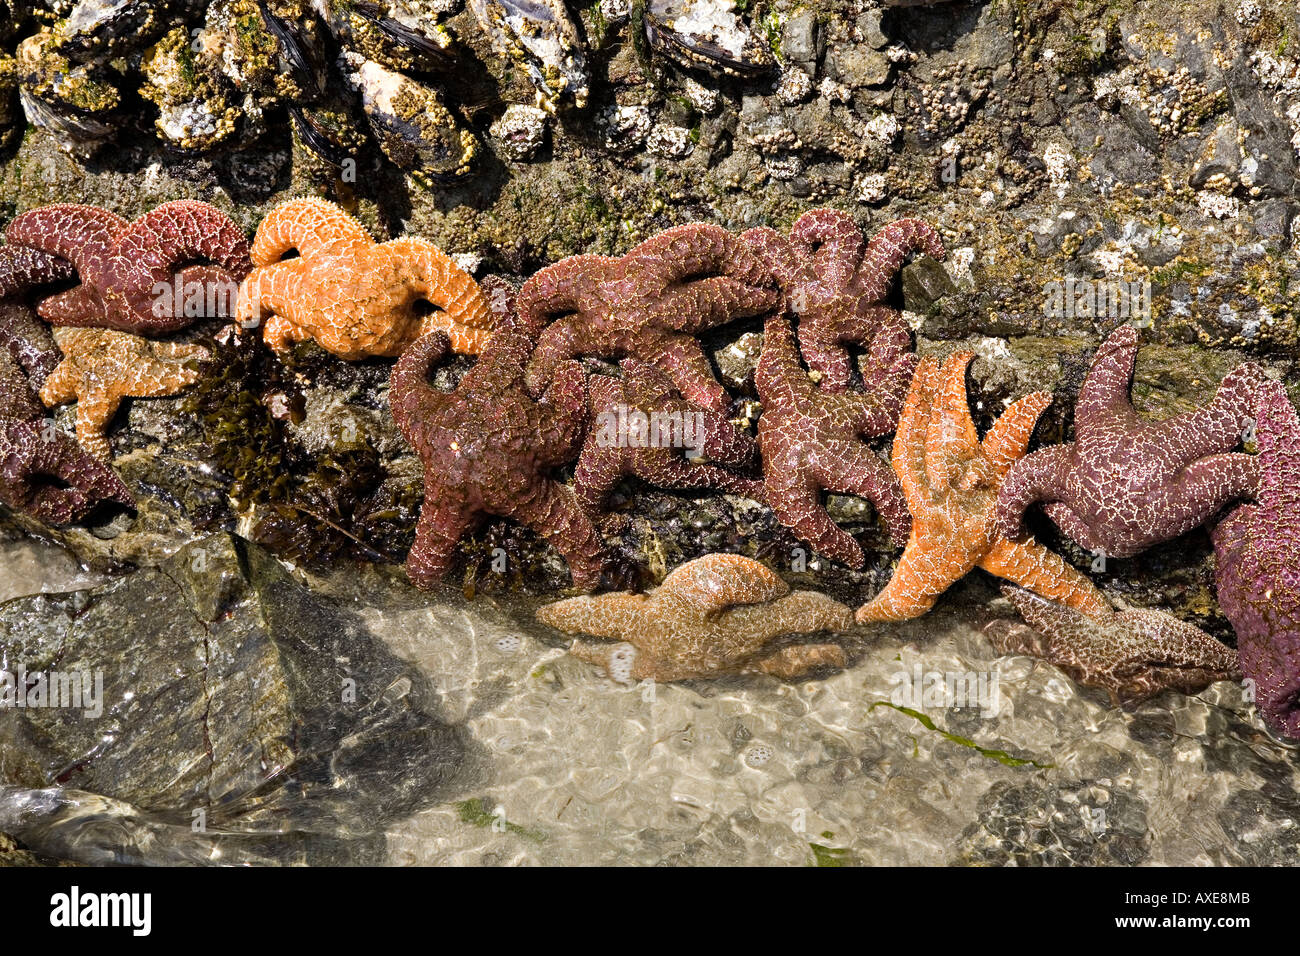 Purple or Ochre sea star starfish Pisaster ochraceus with mussels west coast of Vancouver Canada Stock Photo